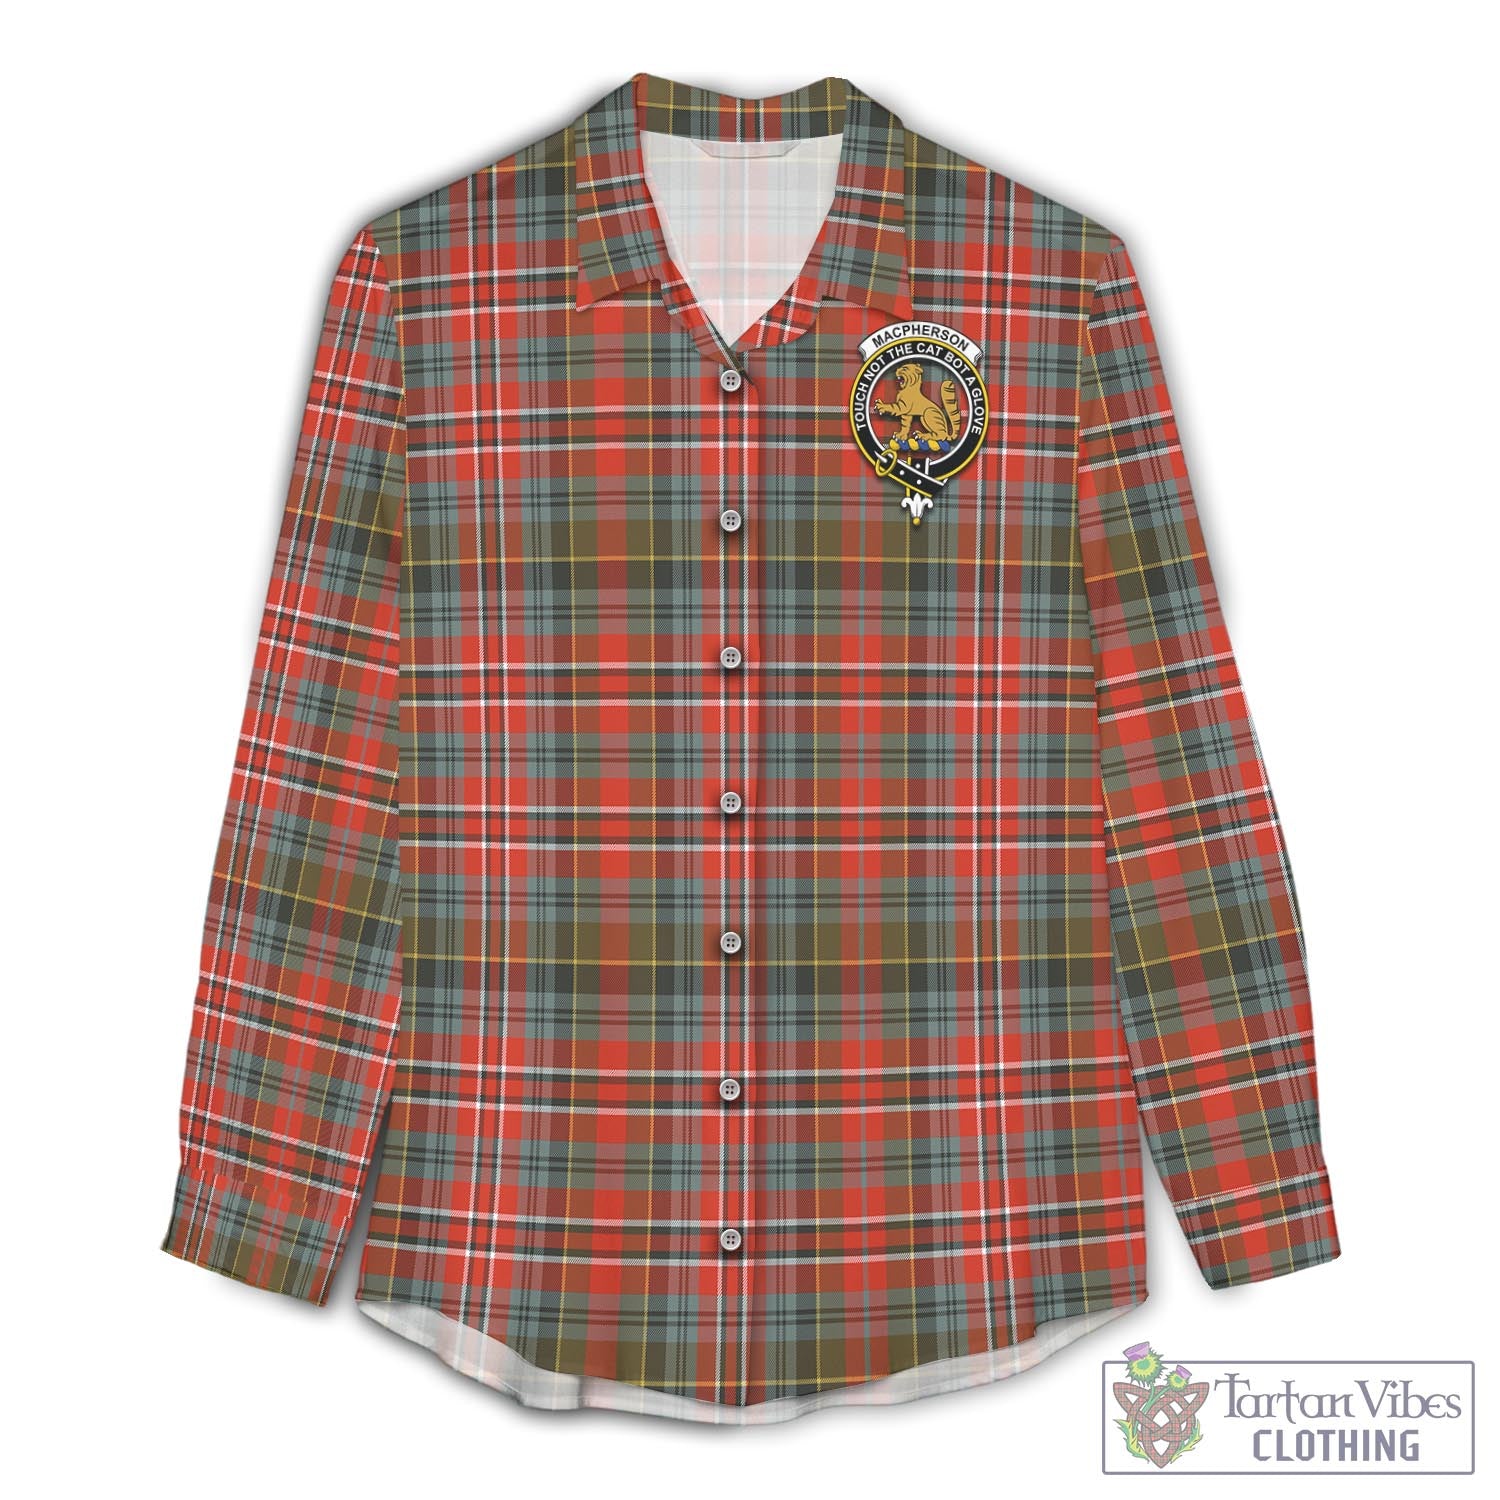 Tartan Vibes Clothing MacPherson Weathered Tartan Womens Casual Shirt with Family Crest